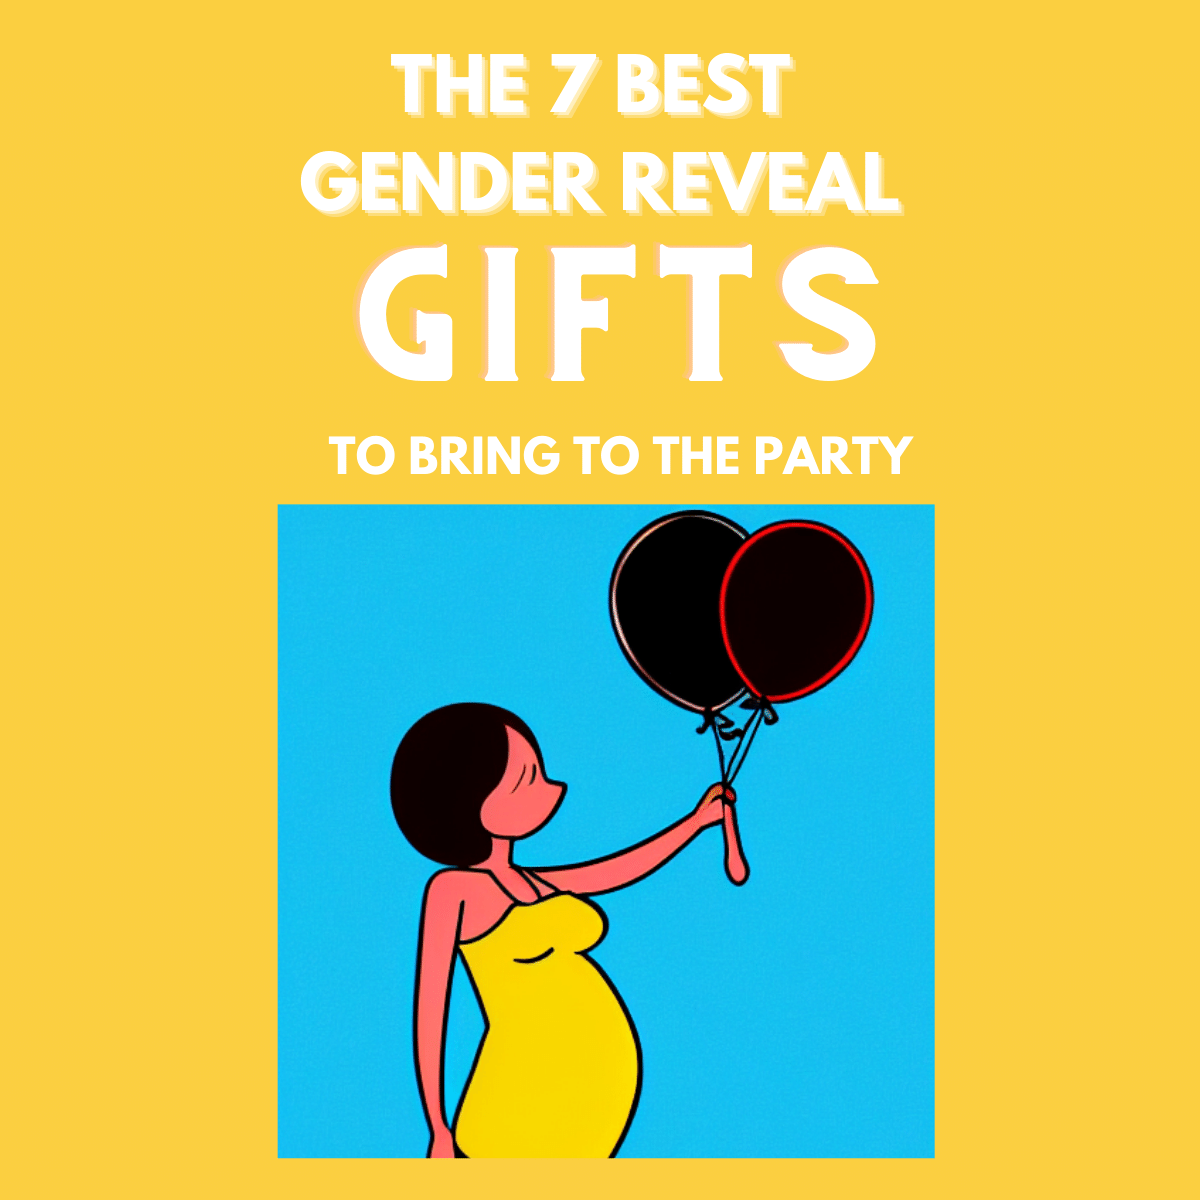 7 of the best gender reveal gifts to bring to the party